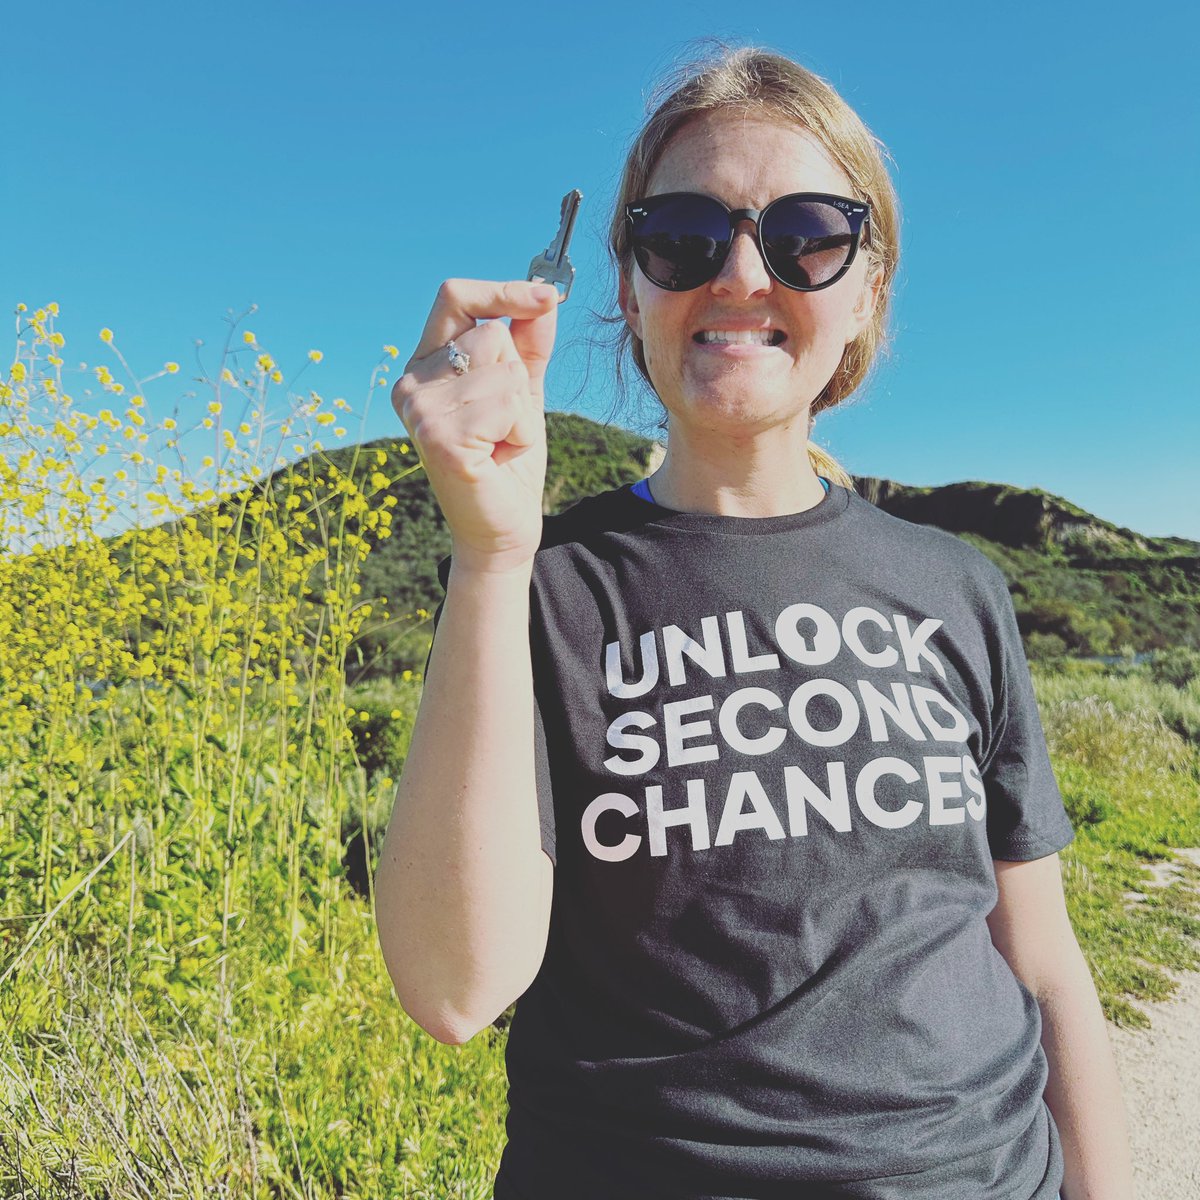 Happy Second Chance Month! I believe in unlocking second chances because no one should be defined by the worst thing they’ve done. We should all live like we know redemption is real! #BeTheKey in YOUR community; join us unlocksecondchances.org🙌🏼 @JusticeReform @prisonfellowshp